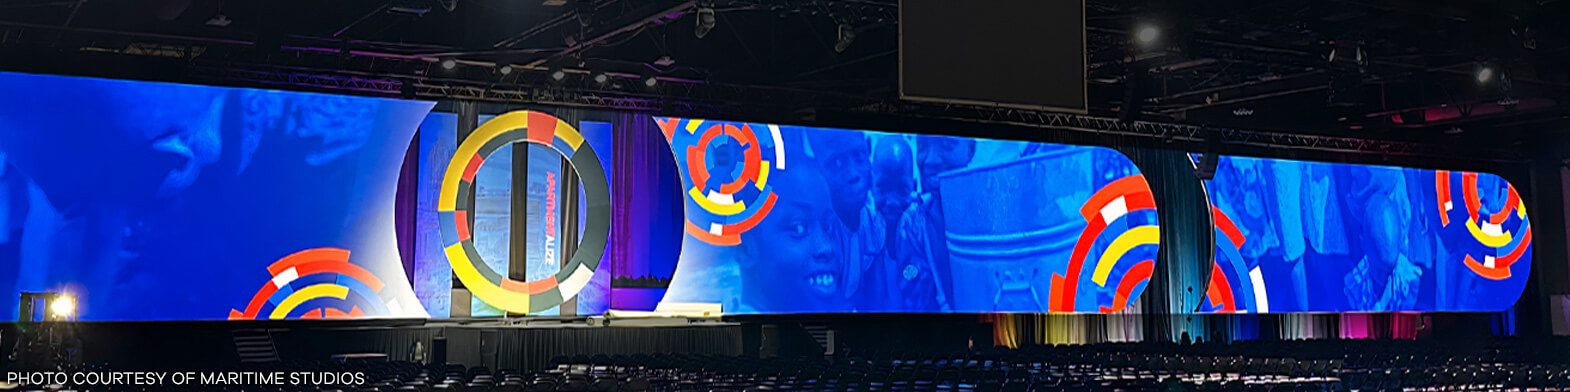 A large and colorful borderless projection screen on stage